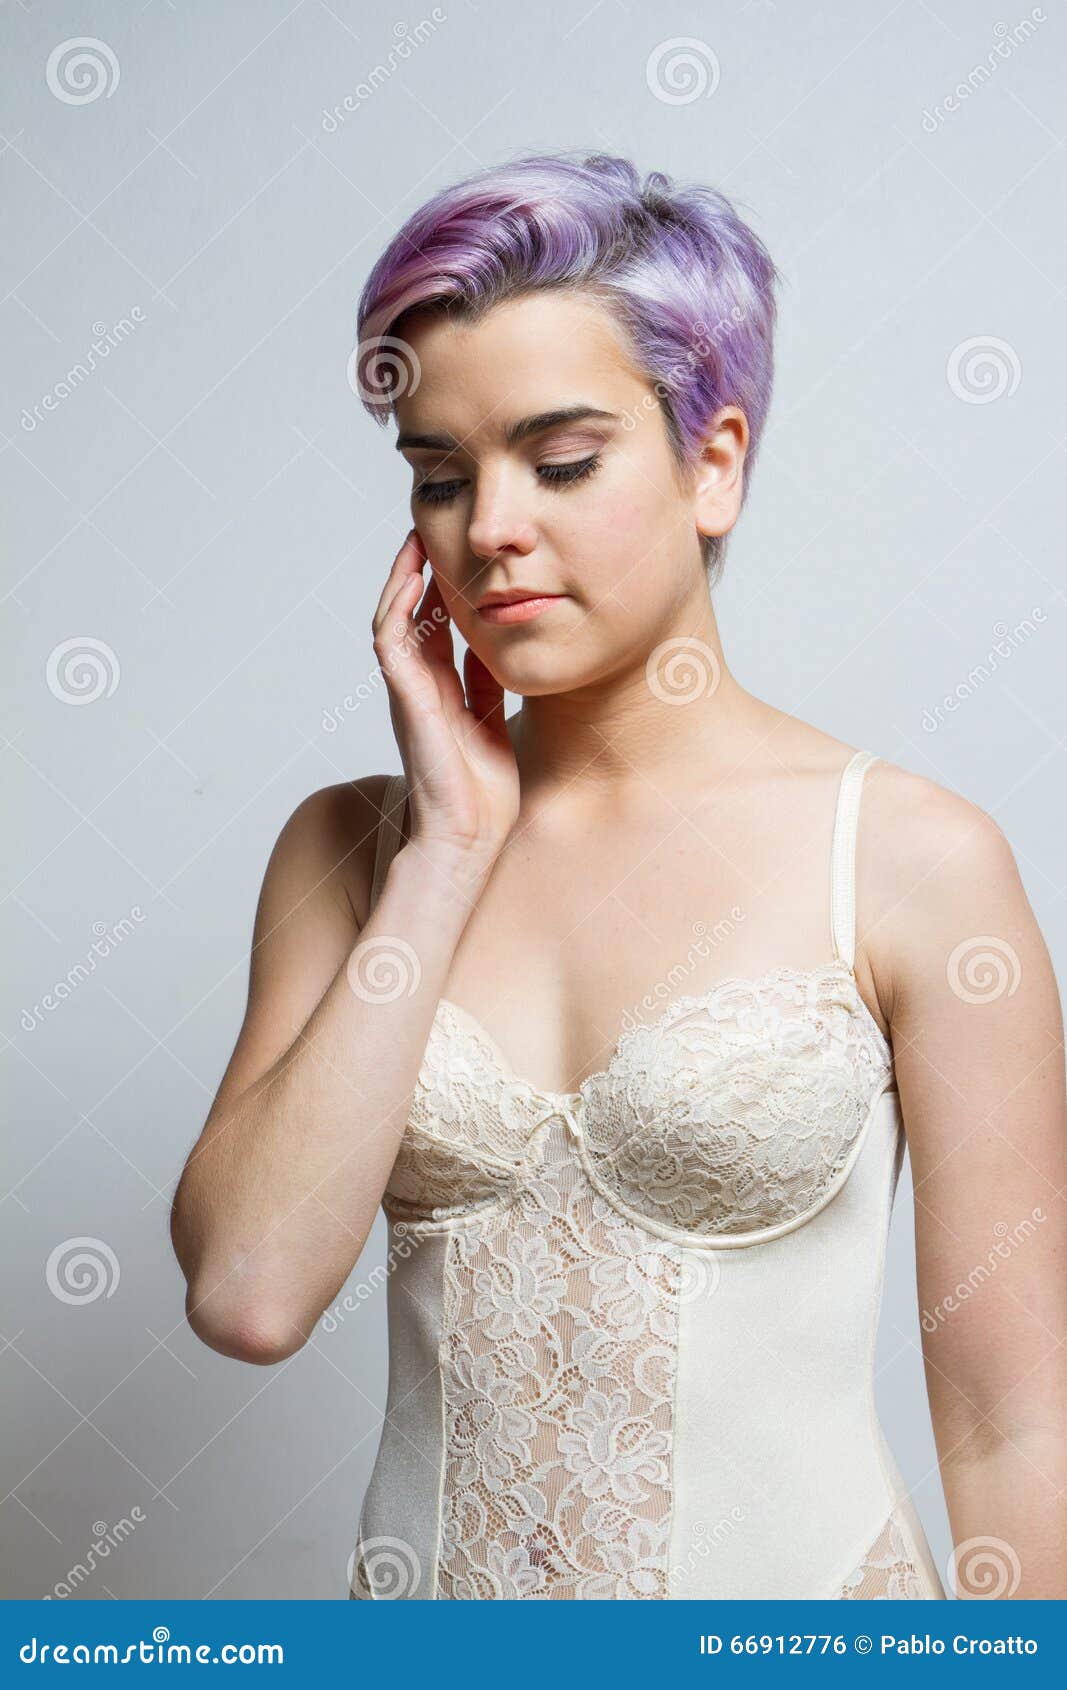 Beautiful Violet Short Haired Girl With Closed Eyes Indoors Stock